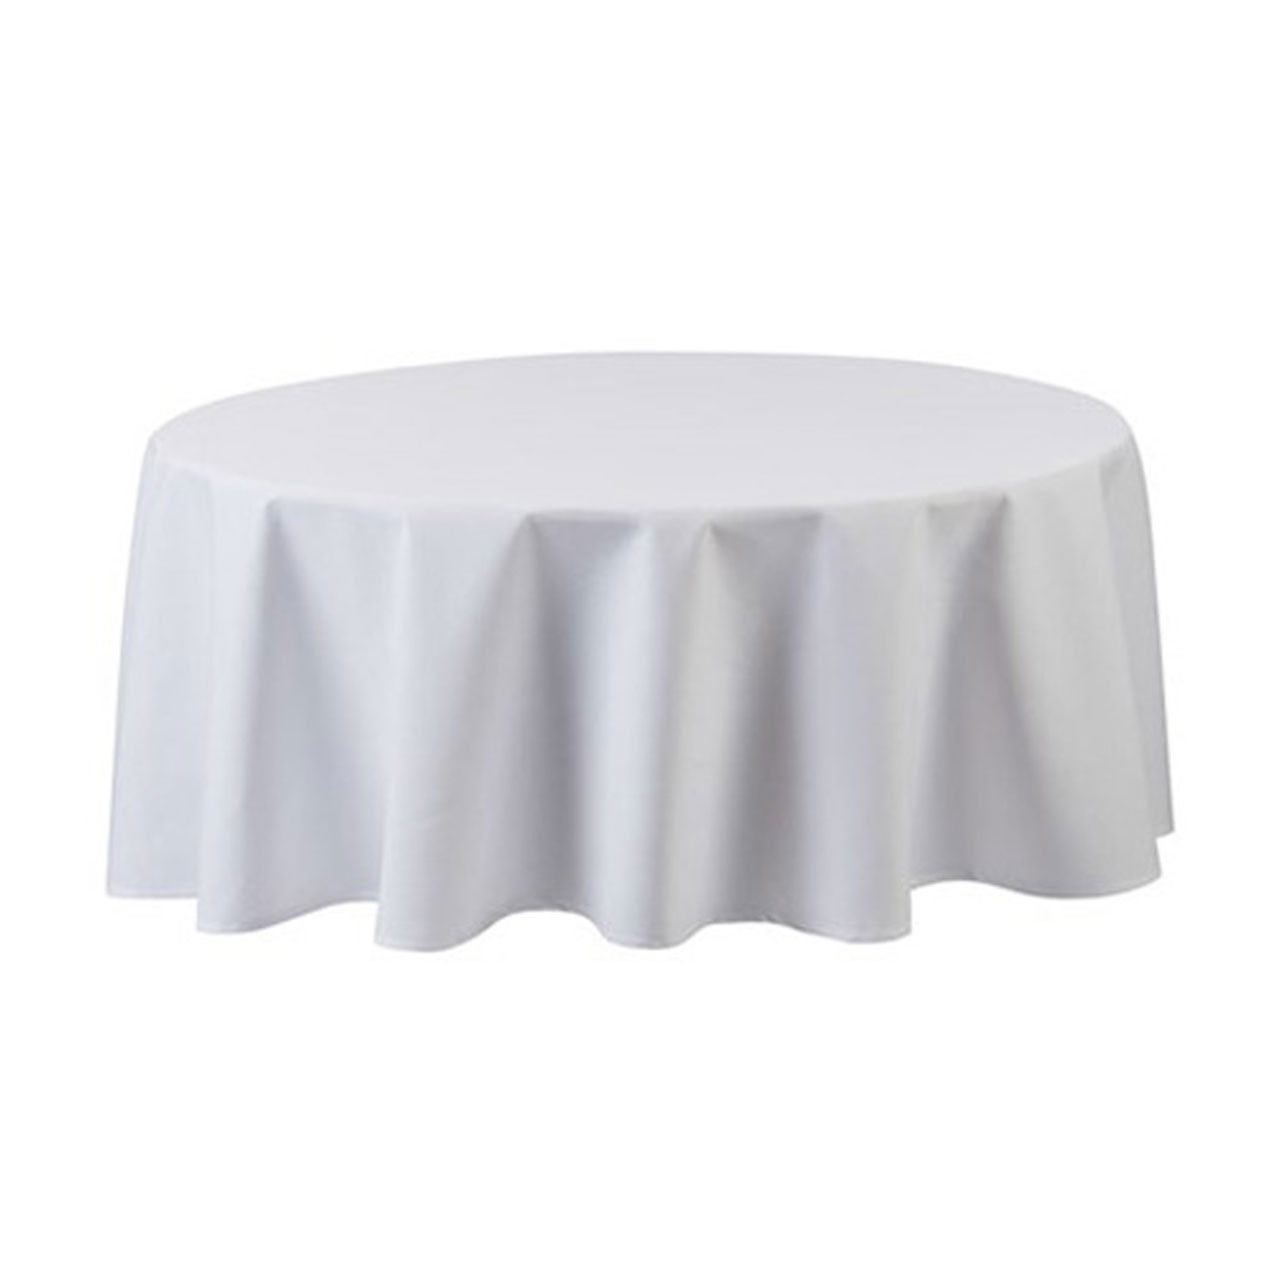 From where are these 120 round tablecloths imported?